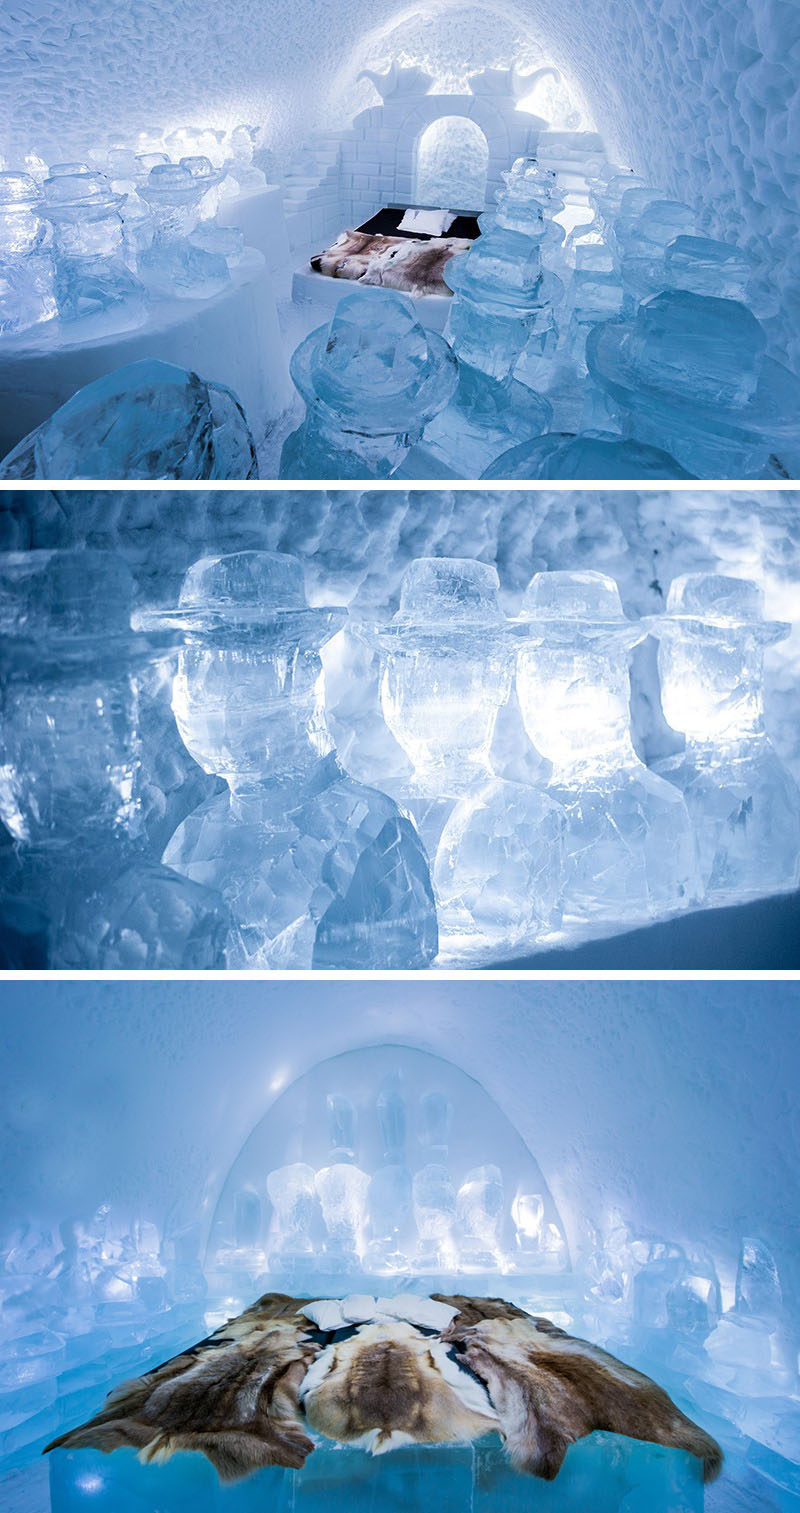 This year’s ICEHOTEL in Sweden is open and we give you a quick look inside